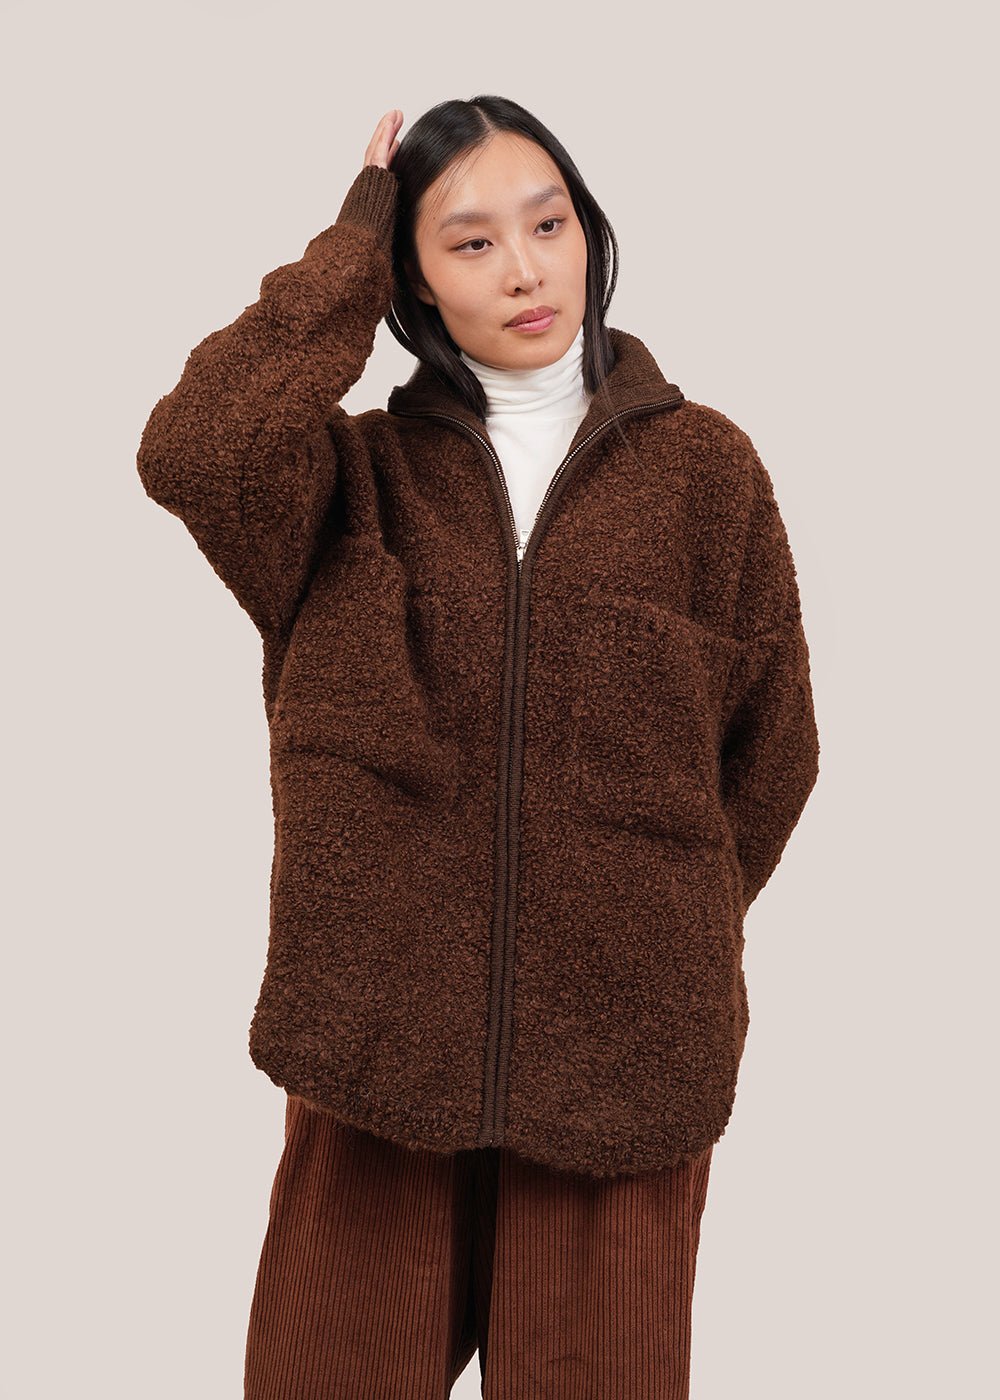 Cordera Tierra Wool/Mohair Jacket - New Classics Studios Sustainable Ethical Fashion Canada